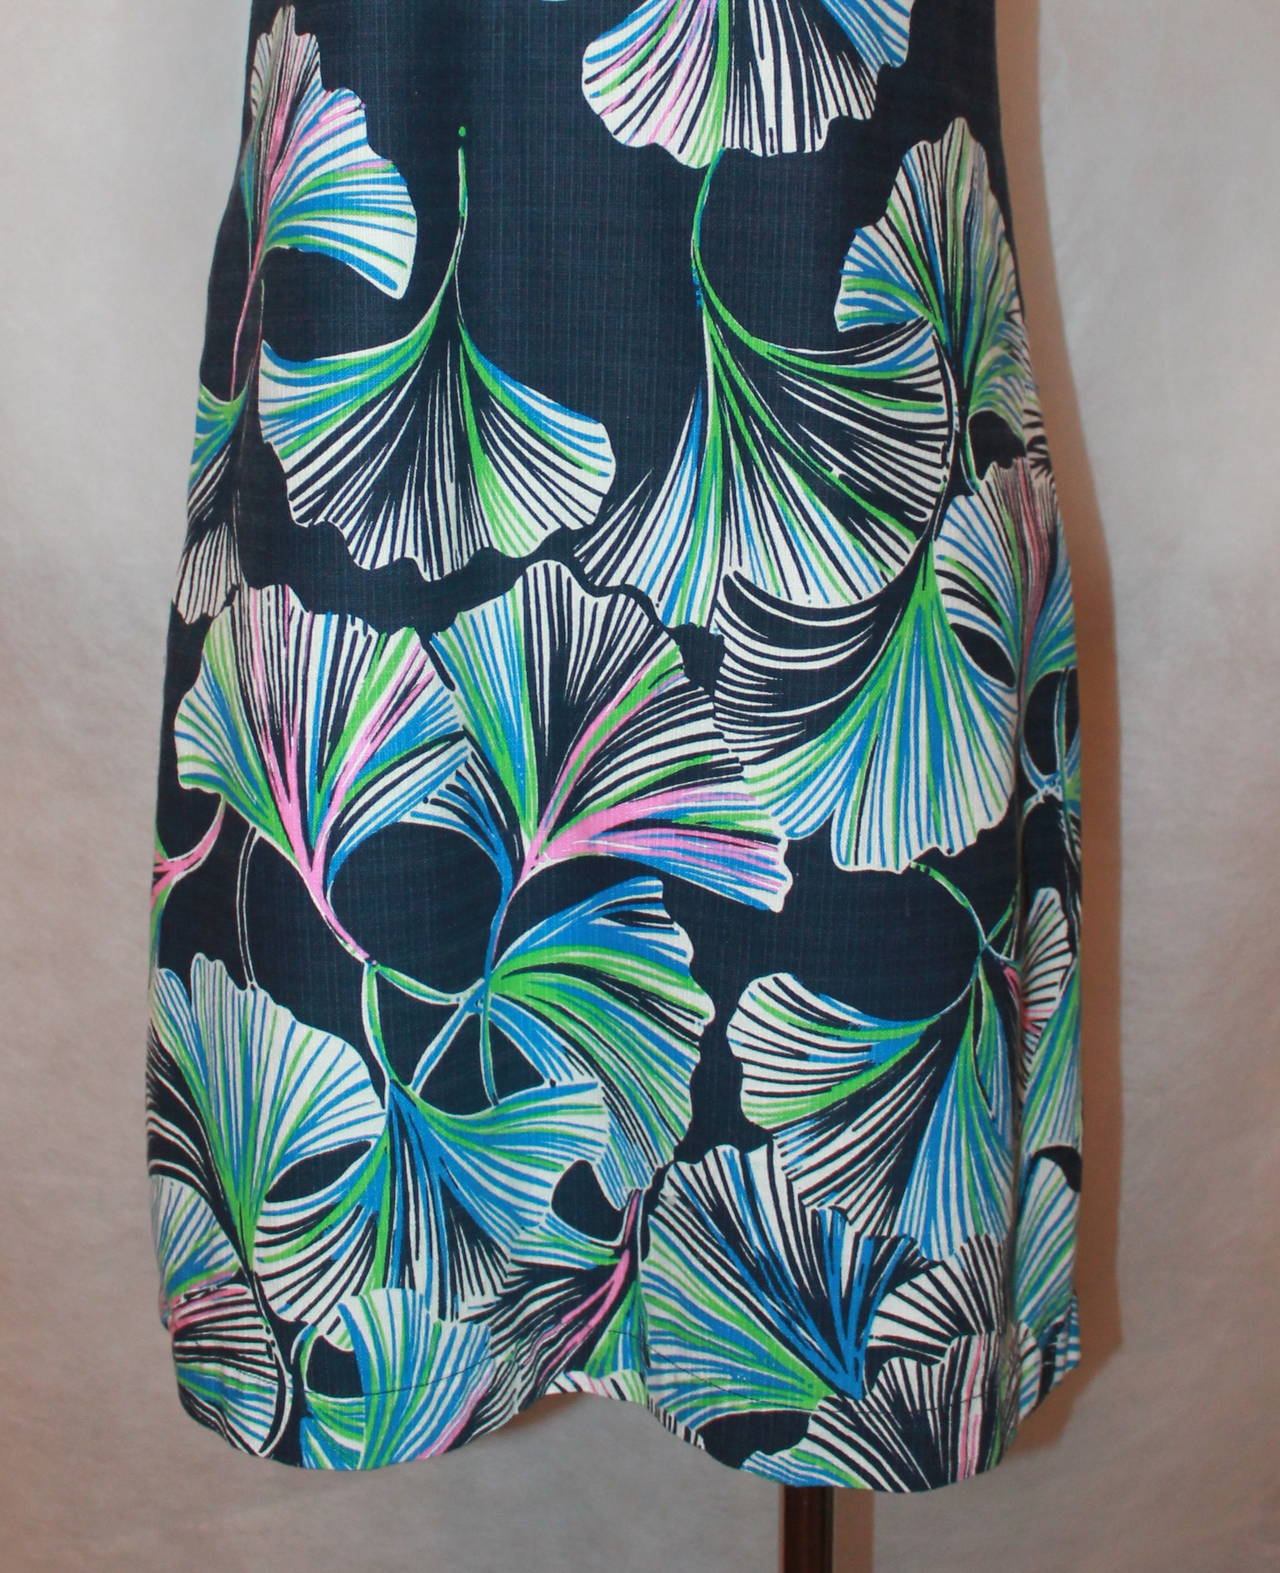 Women's Lilly Pulitzer Navy Floral Print Dress - 6